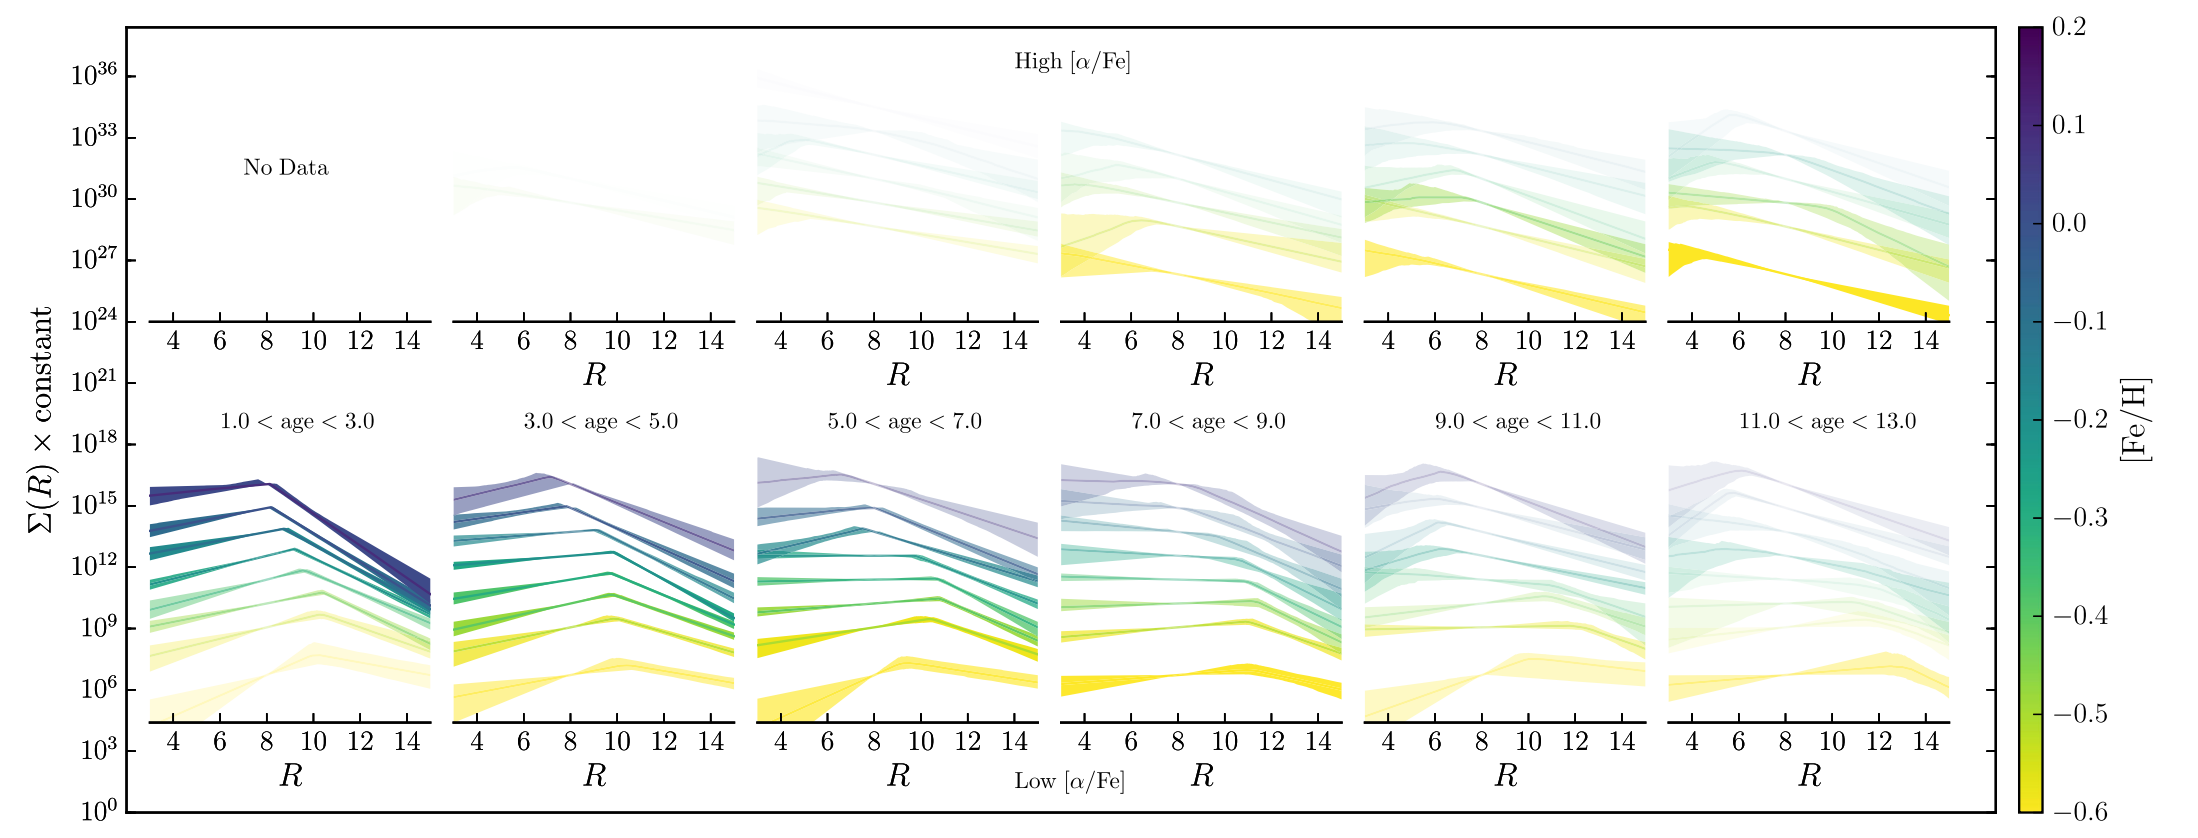 Figure 6 from Mackereth et al. (2017): Disk surface density distributions of stellar populations separated by [a/Fe], [Fe/H], and age Sun